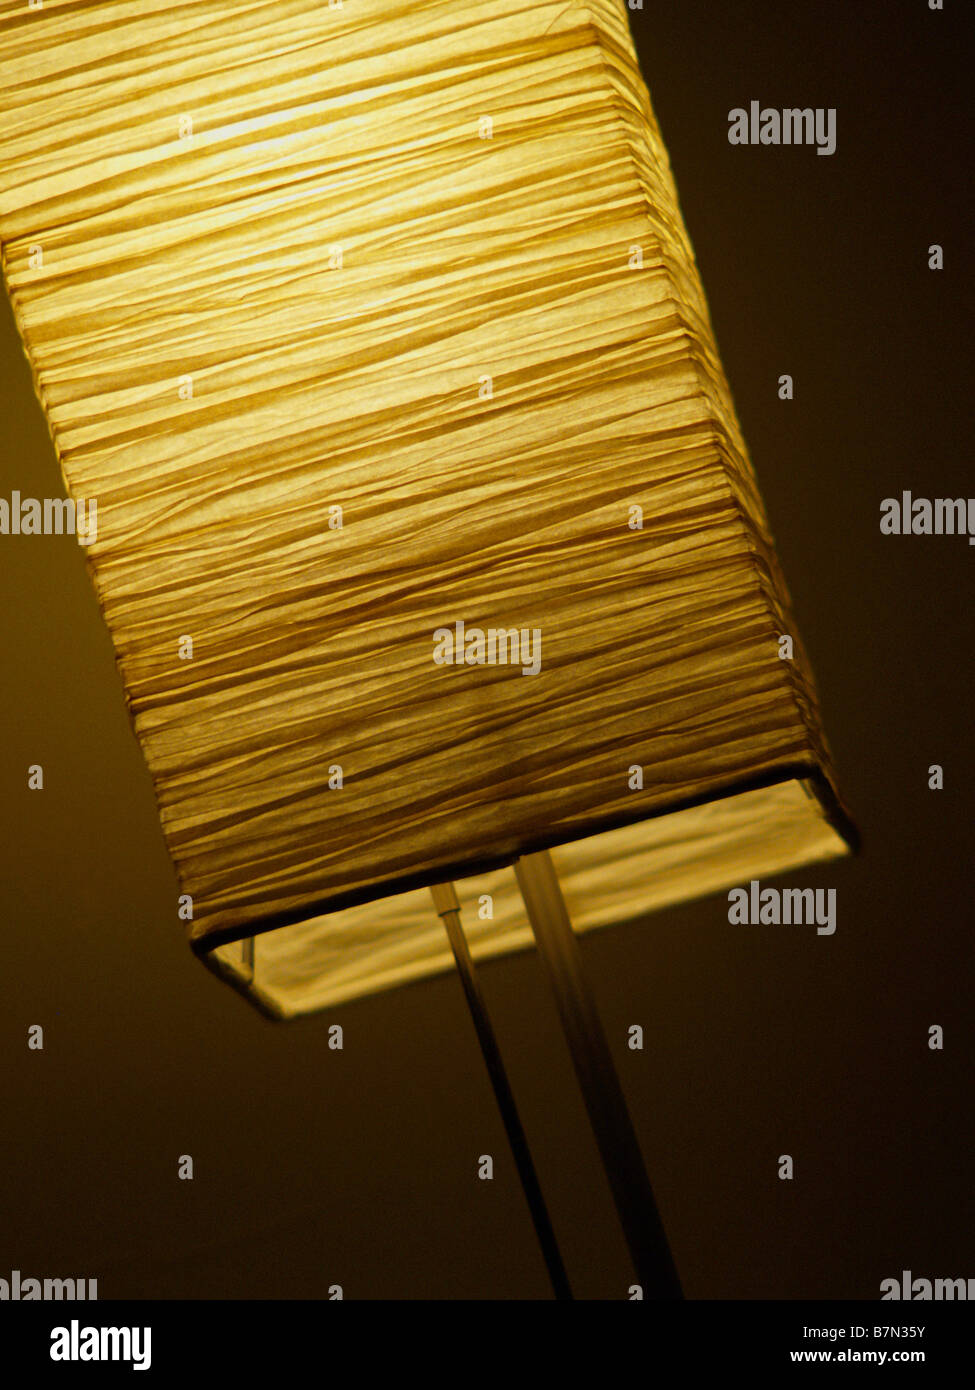 Small illuminated lamp with wrinkled paper shade against dim background. Stock Photo